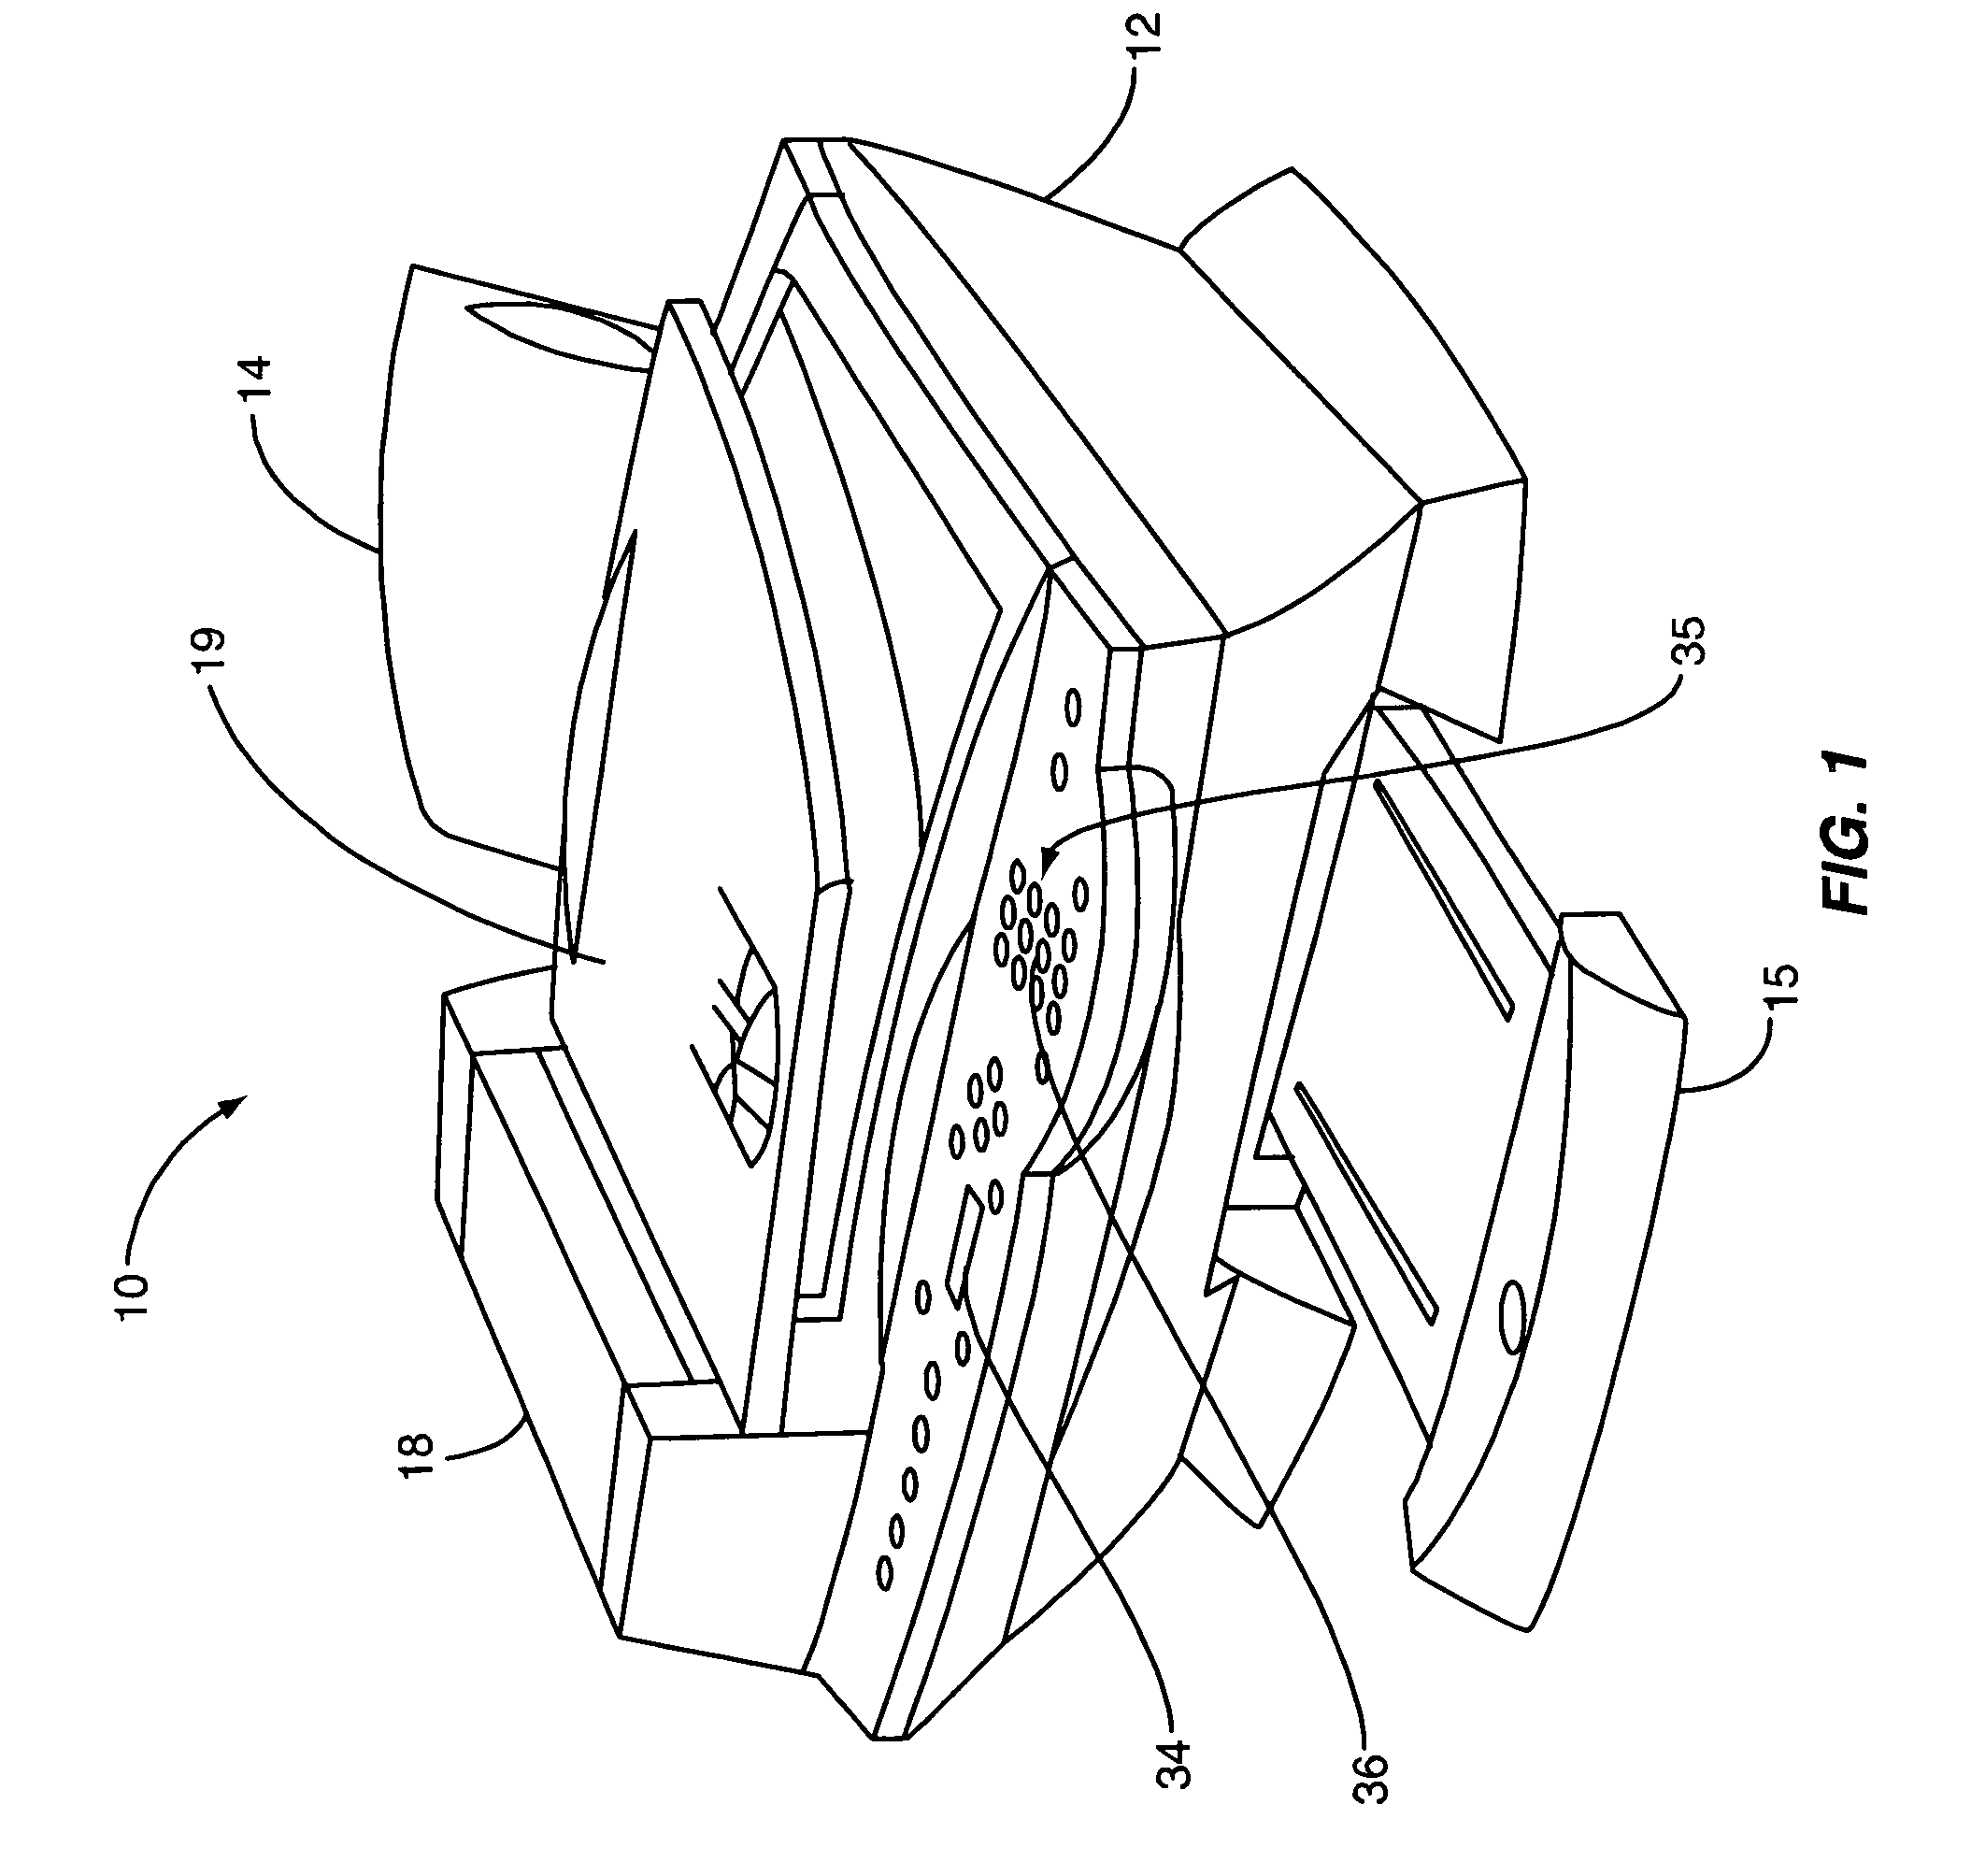 Method and device for reducing a size of a scanning device